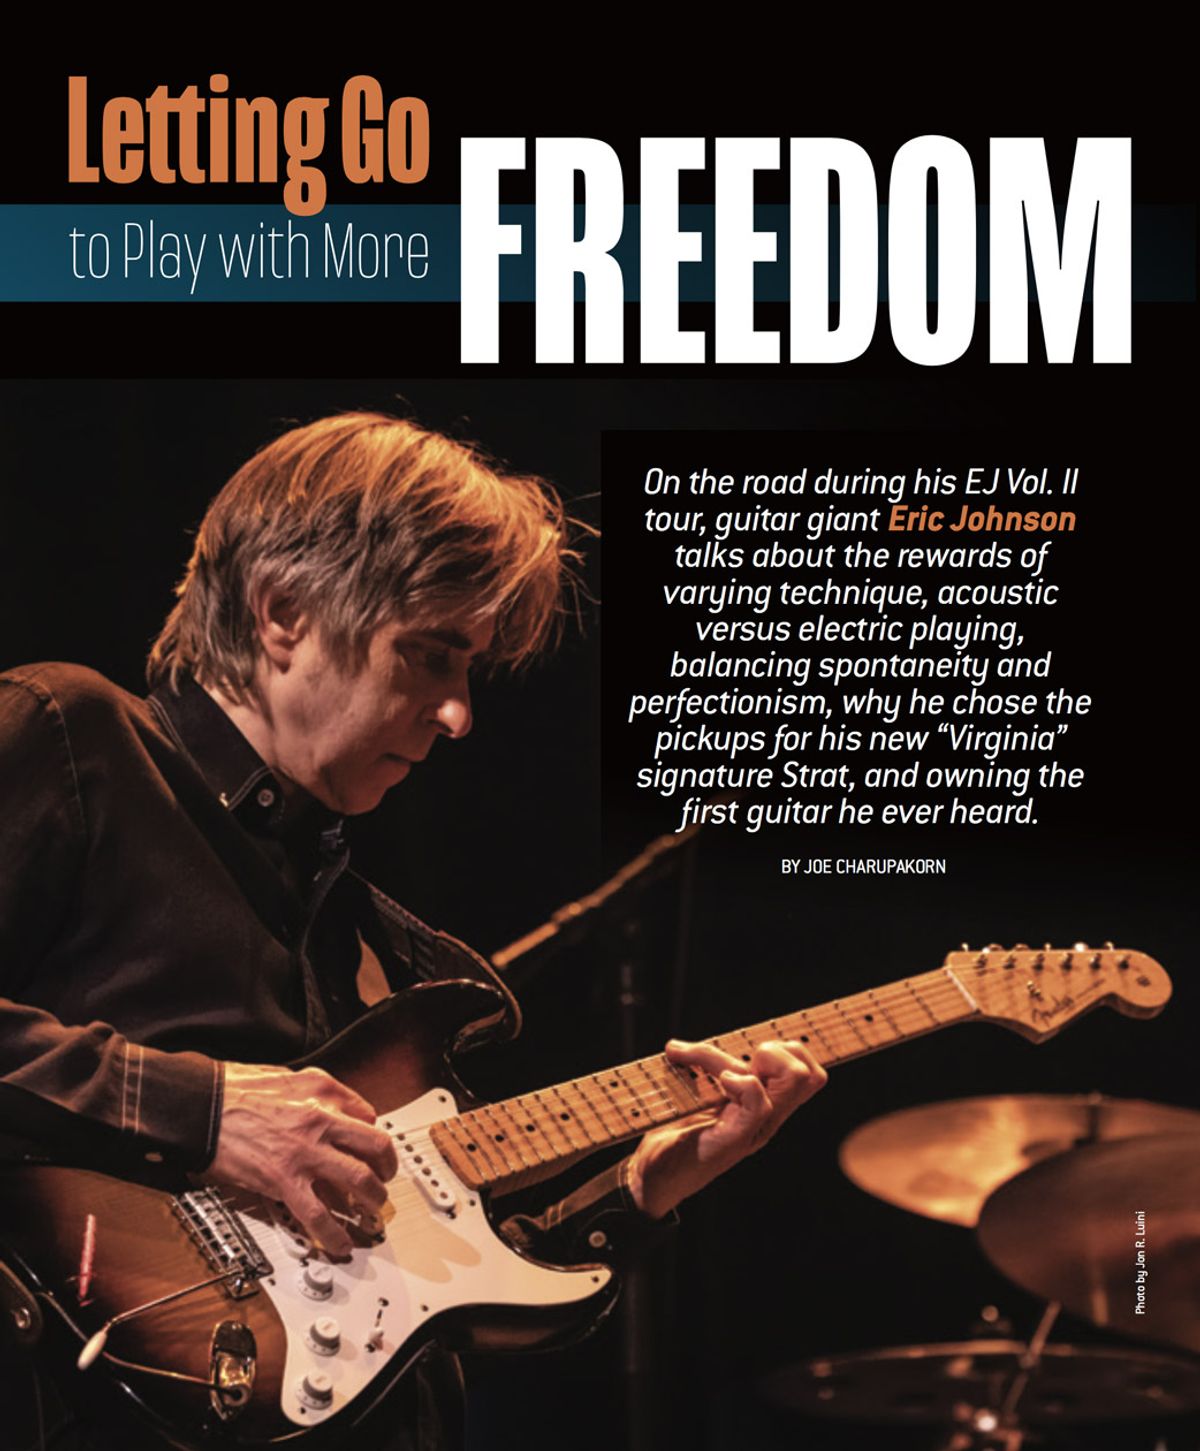 Eric Johnson on Breaking Patterns to Play with More Freedom